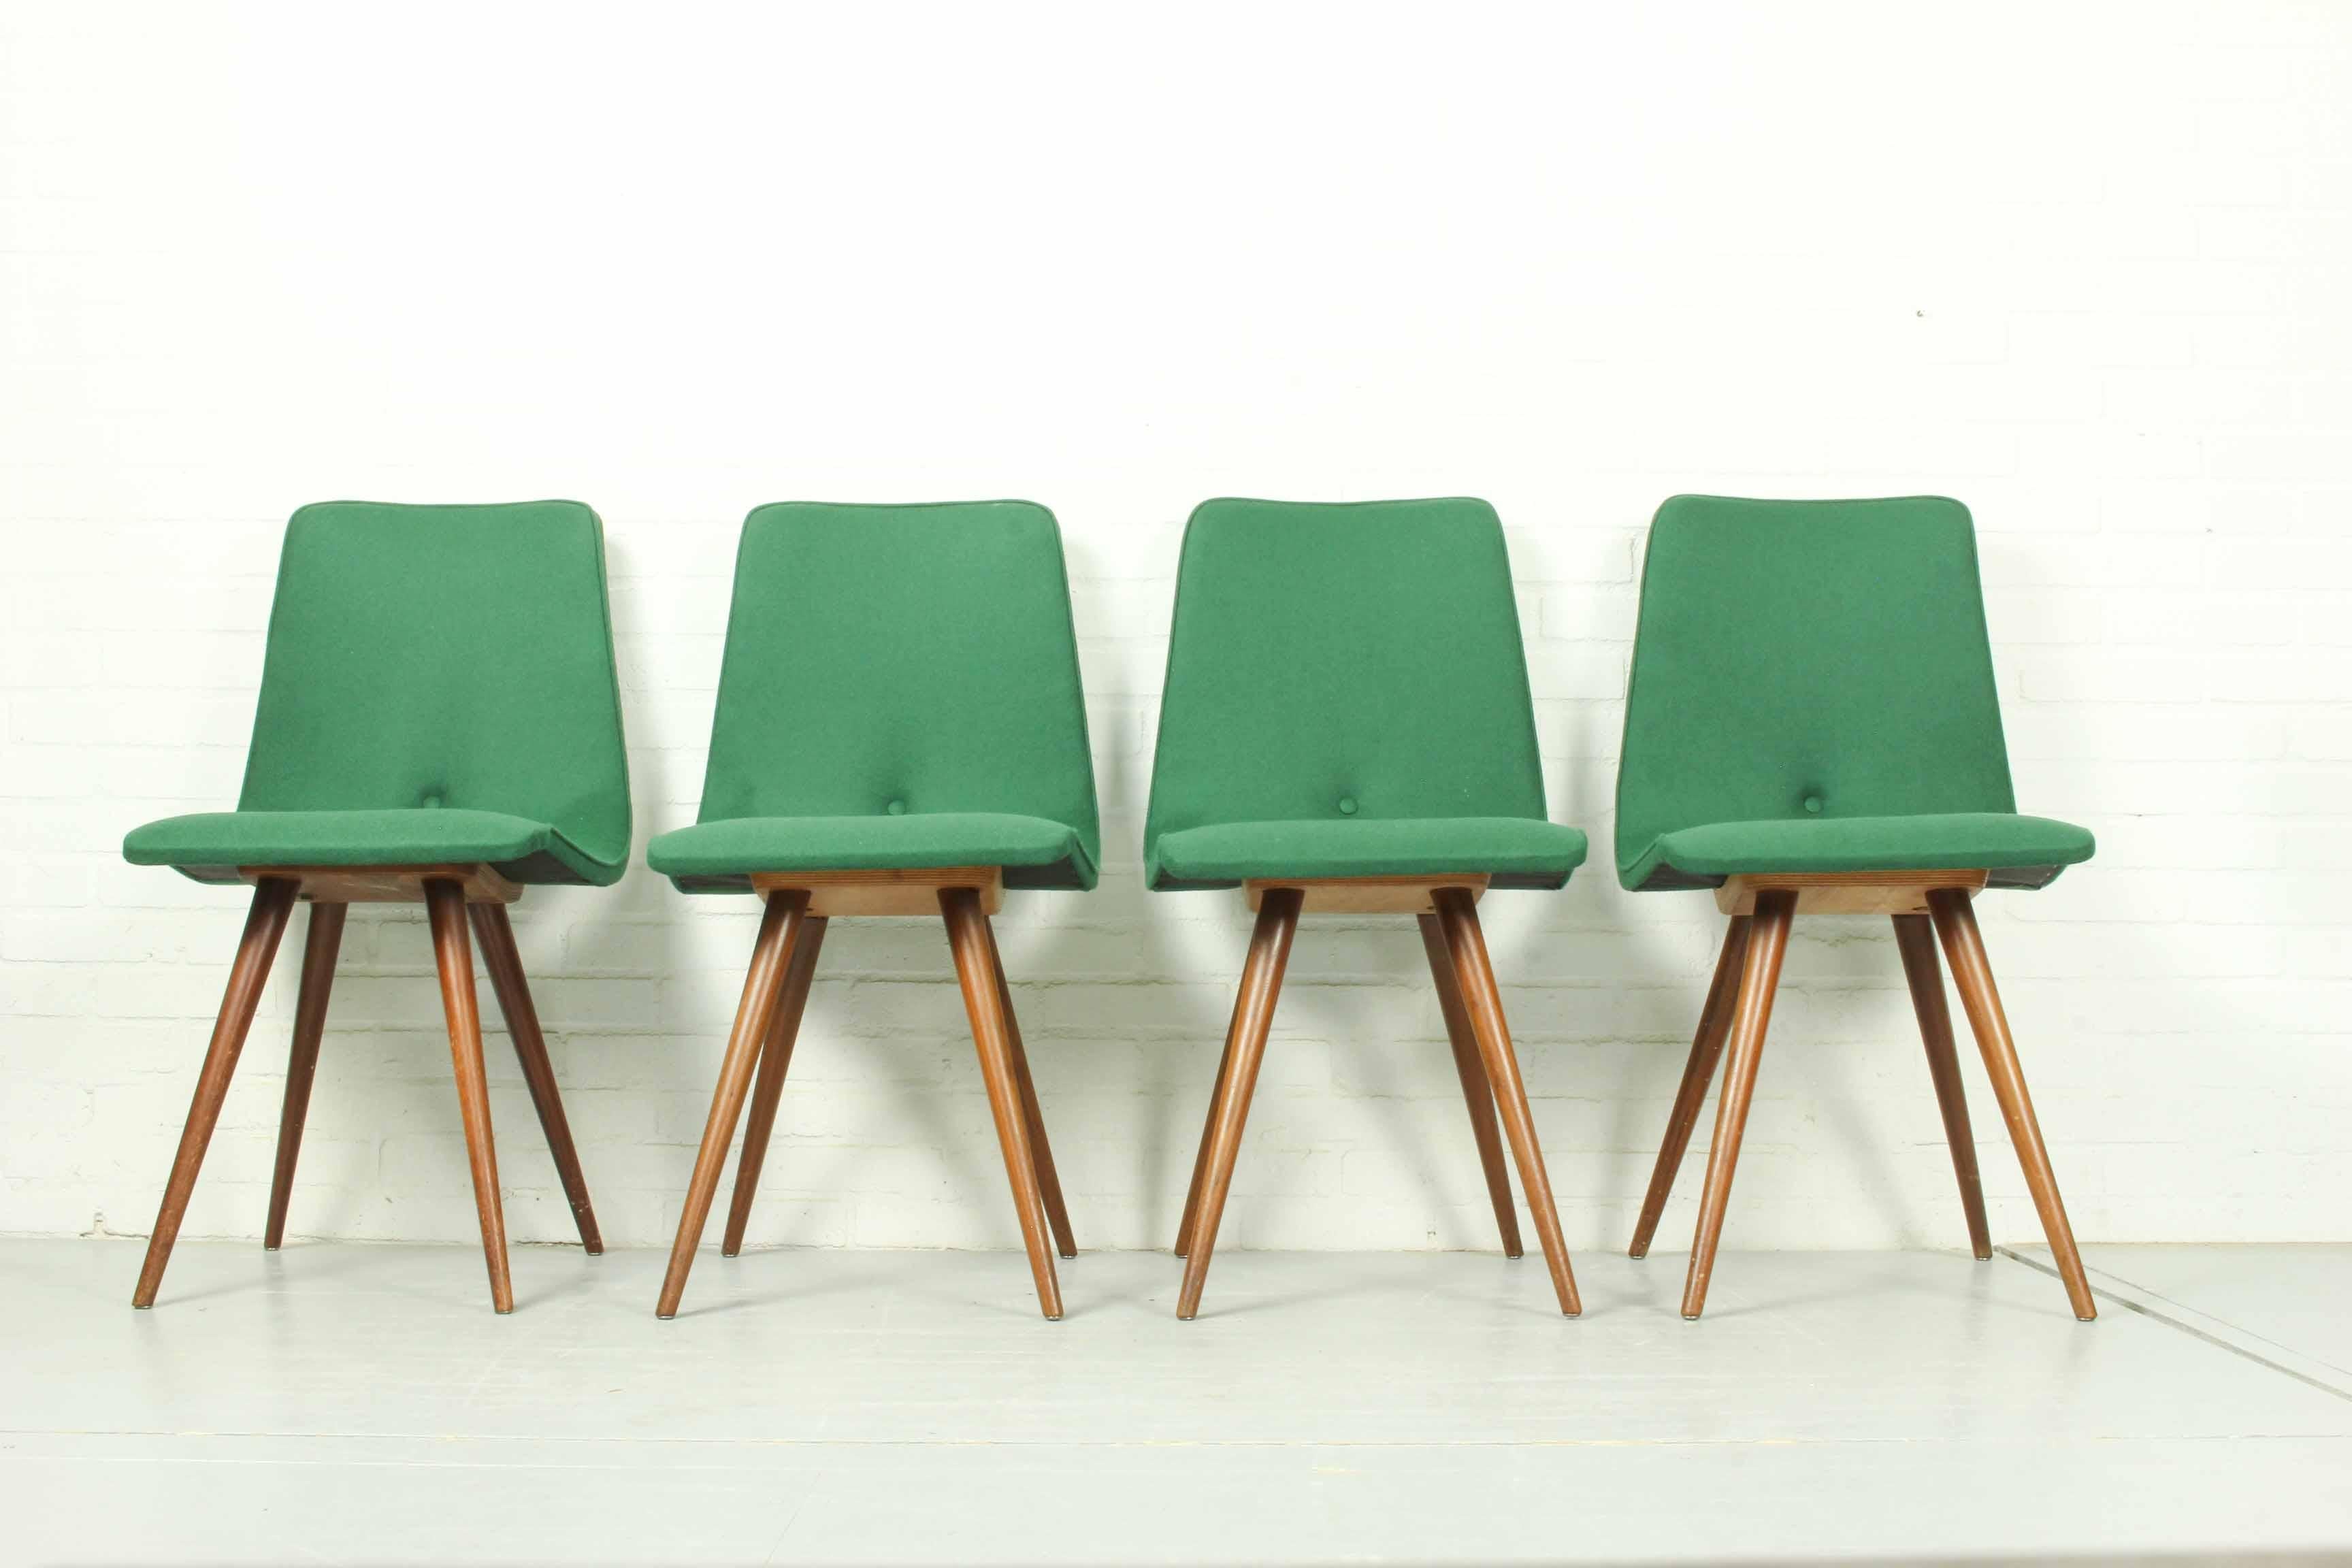 Wool Set of 4 Teak Dining Chairs by Van Os, 1950s For Sale